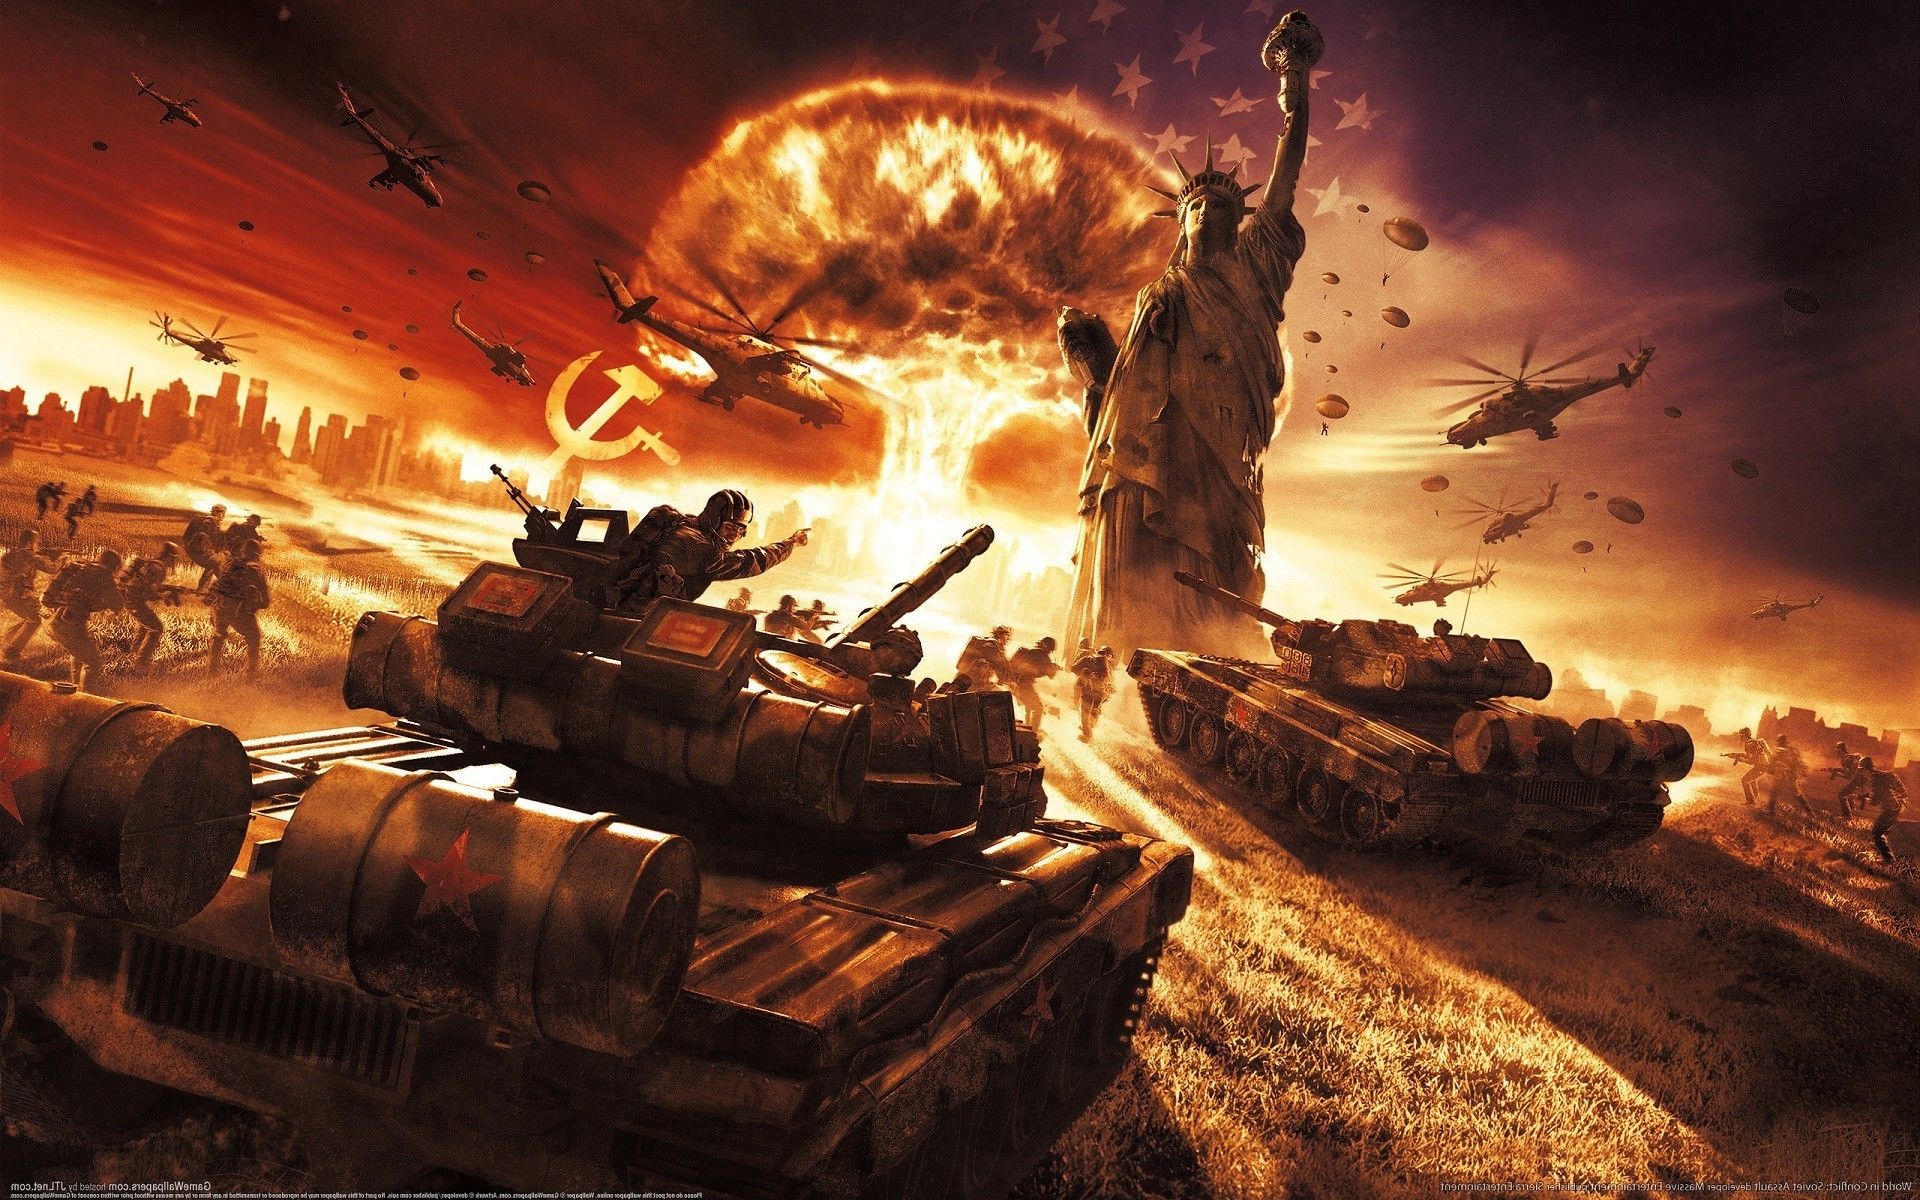 world in conflict video games soviet army soviet union ussr statue statue of liberty aircraft military aircraft helicopters war explosion nuclear soldier world war iii wallpaper